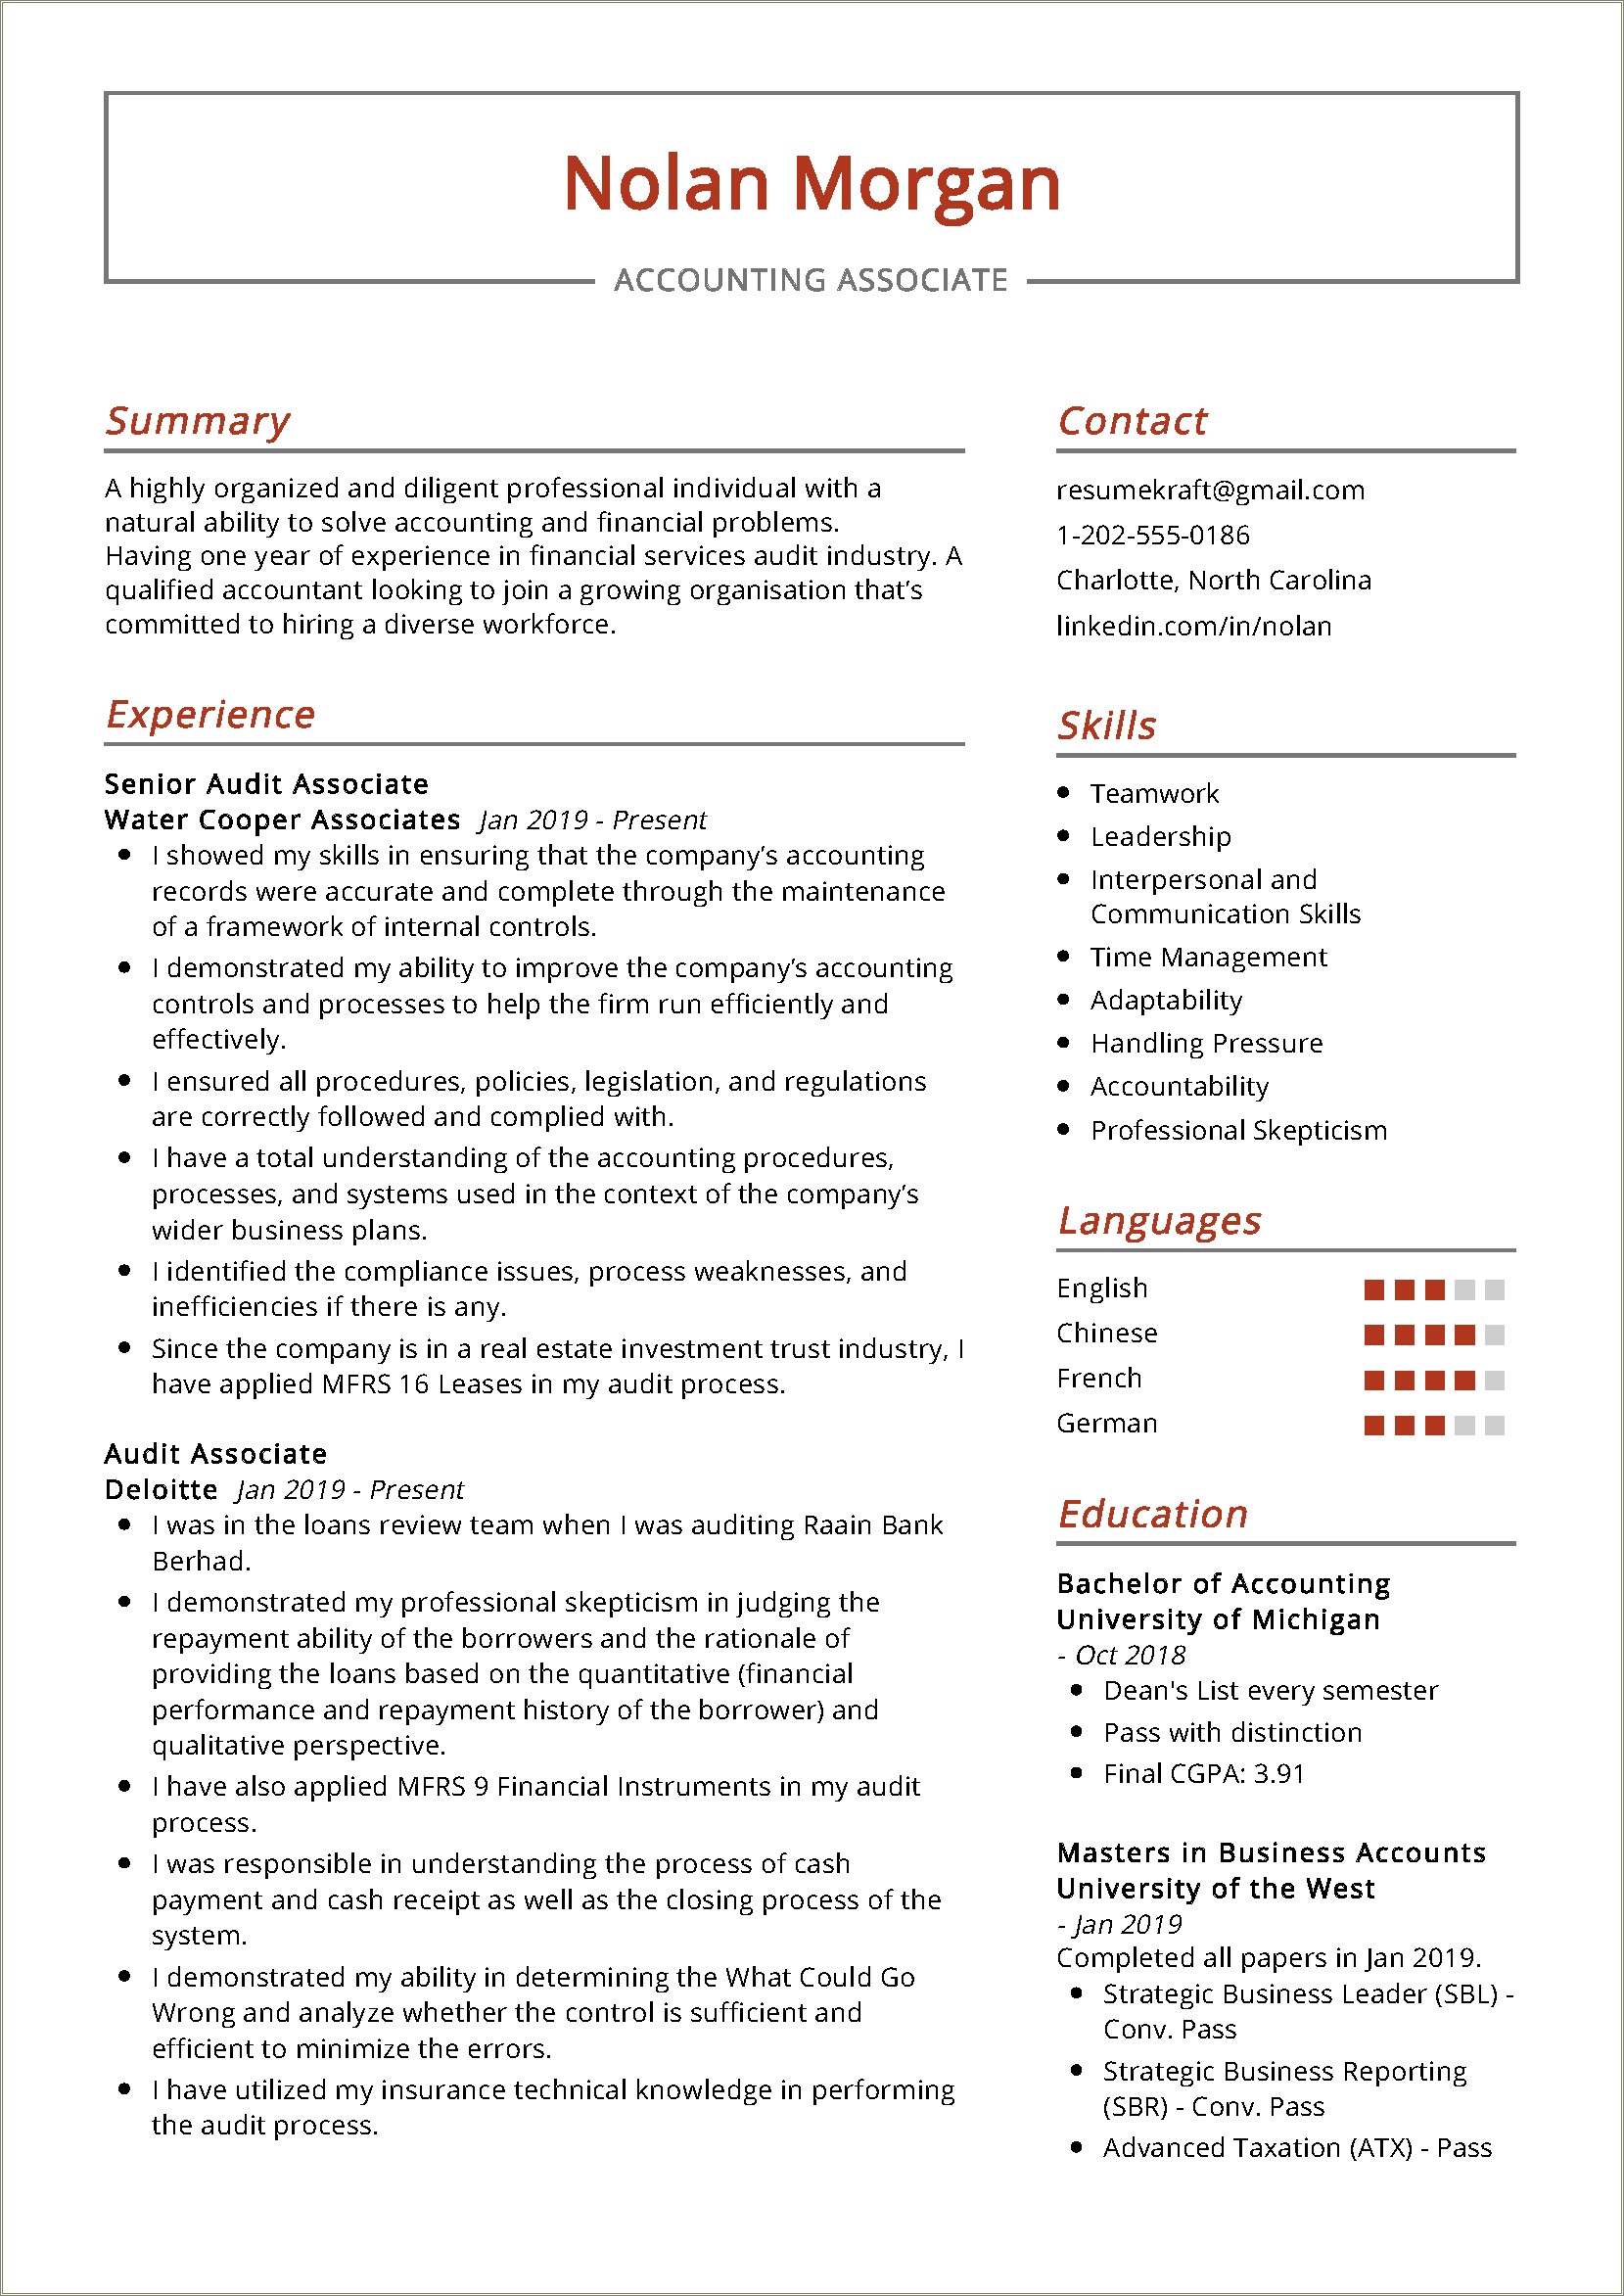 One Year Experience Resume Format For Accountant